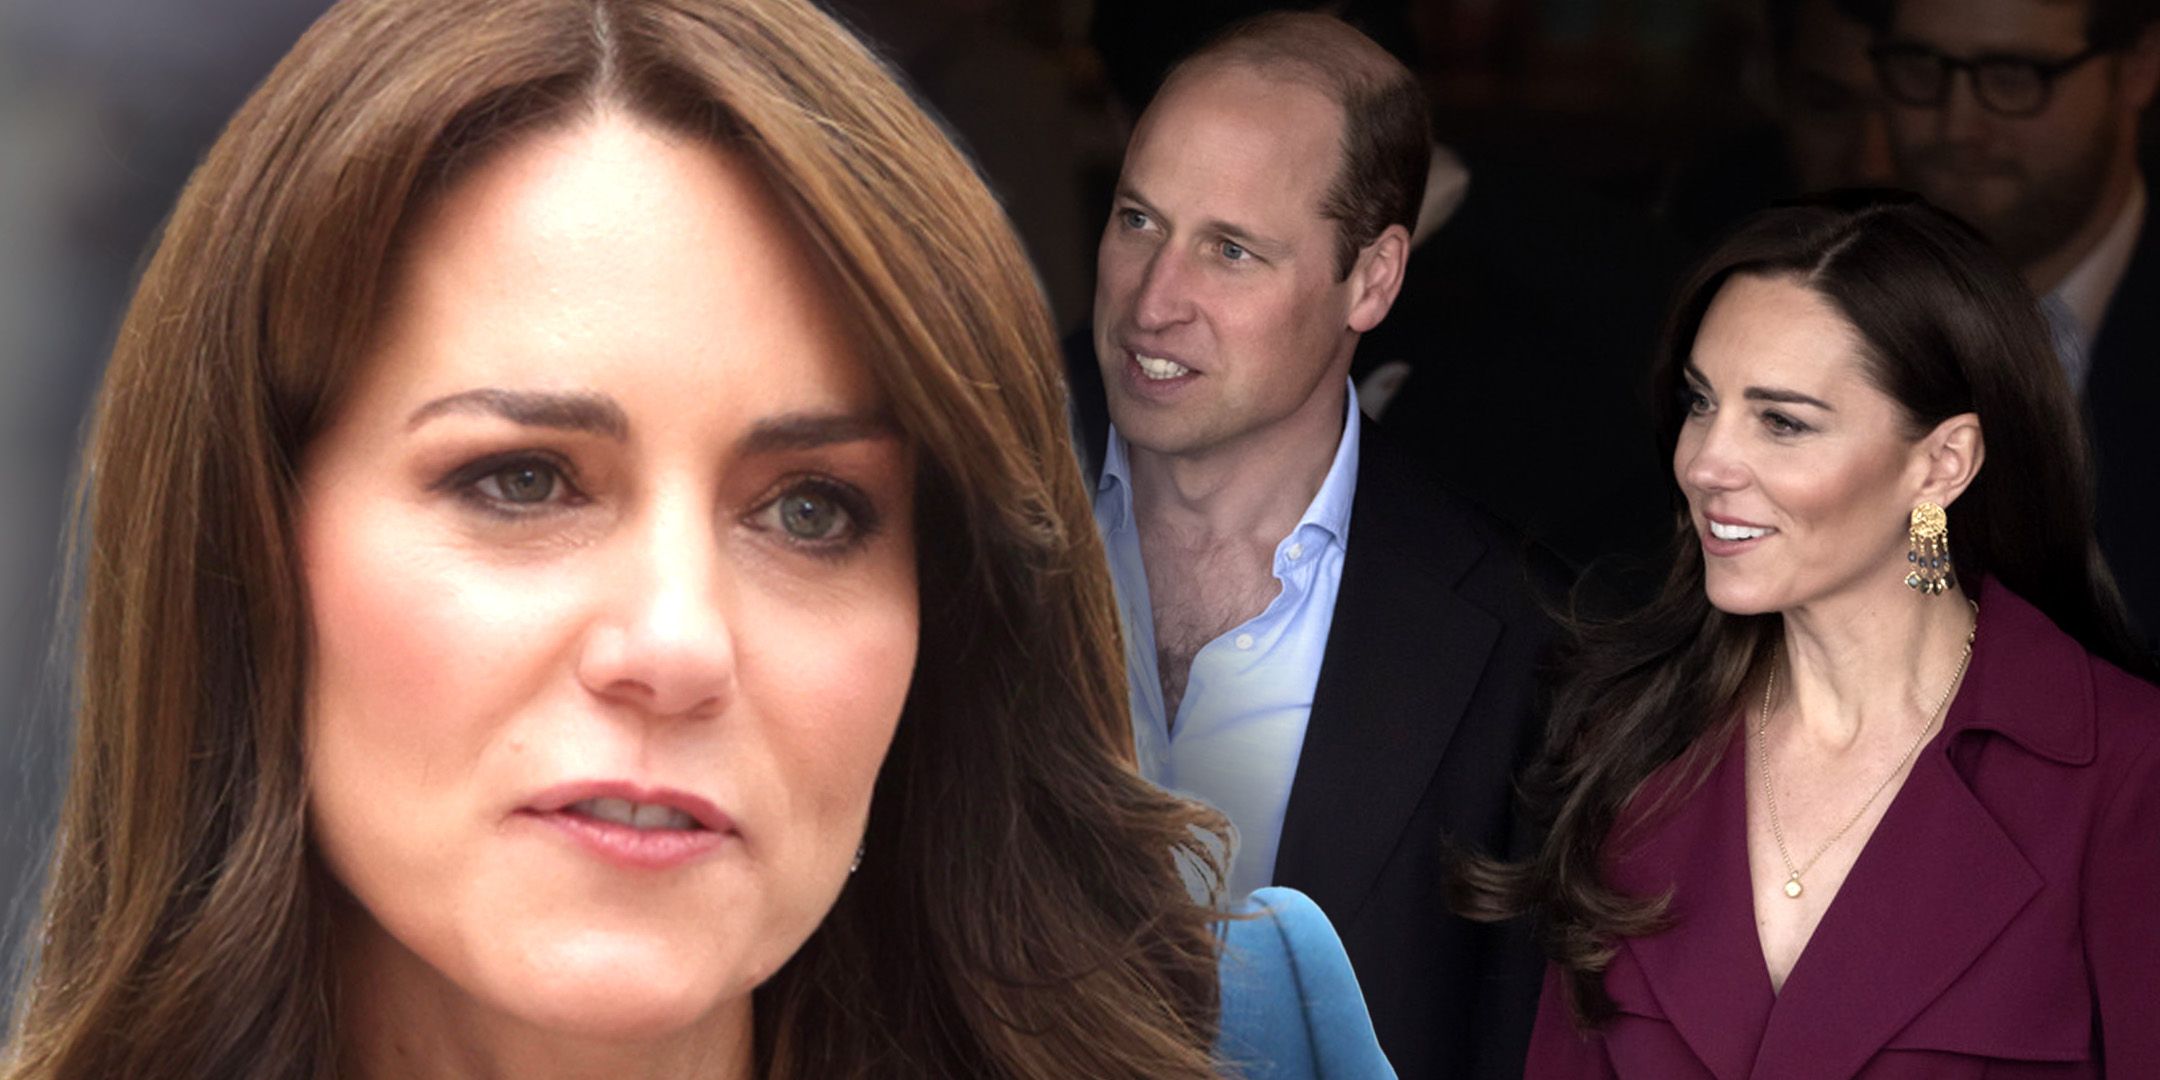 Princess Kate Middleton and Prince William relationship